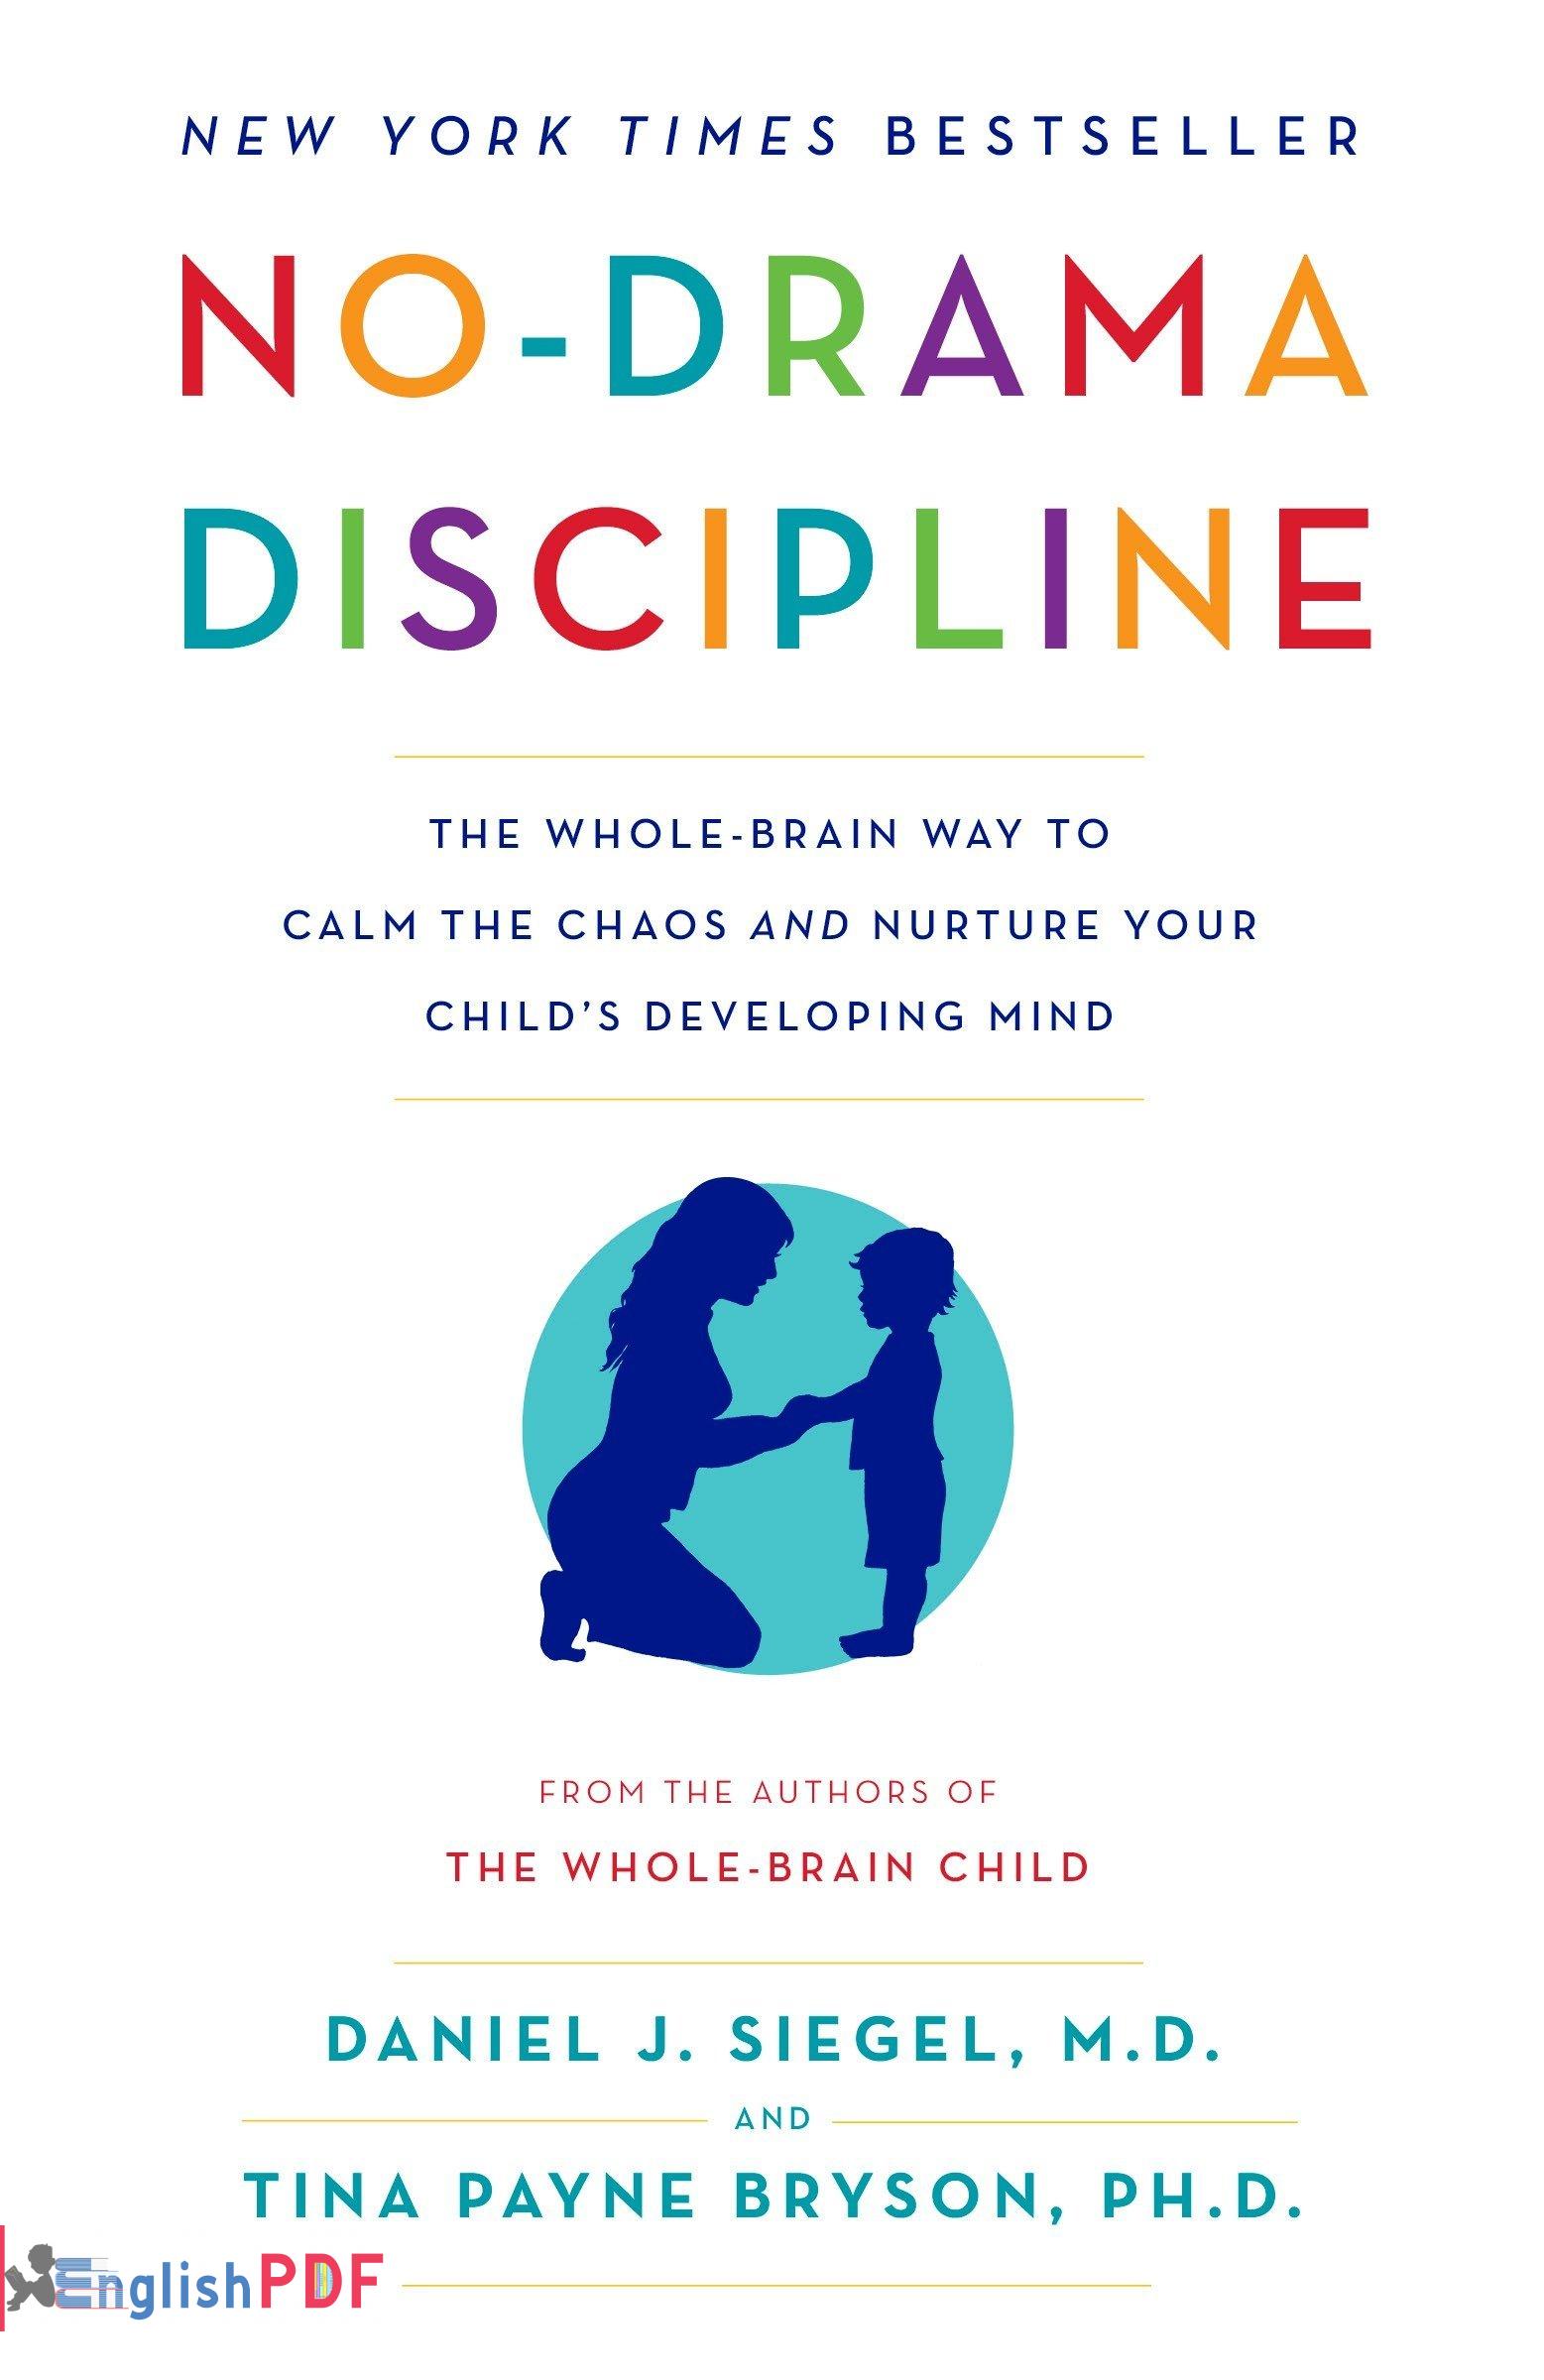 No-Drama Discipline PDF The Whole Brain Way to Calm the Chaos and Nurture Your Childs Developing Mind PDF By EnglishPDF